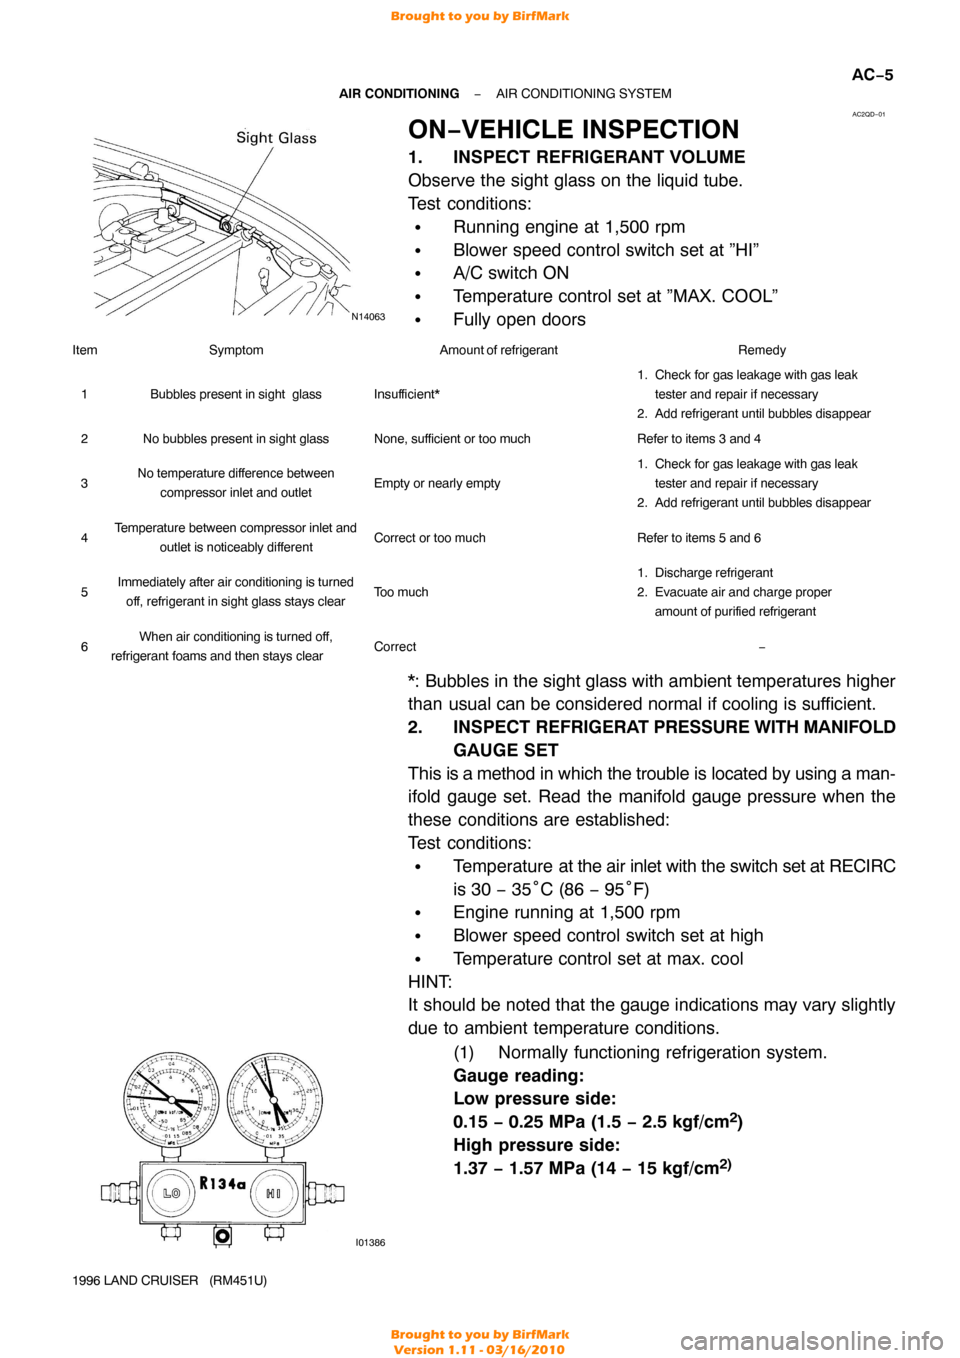 TOYOTA LAND CRUISER 1996 J80 Service Manual N14063
AC2QD−01
I01386
−
AIR CONDITIONING AIR CONDITIONING SYSTEM
AC−5
1996 LAND CRUISER   (RM451U)
ON−VEHICLE INSPECTION
1. INSPECT REFRIGERANT VOLUME
Observe the sight glass on the liquid tu